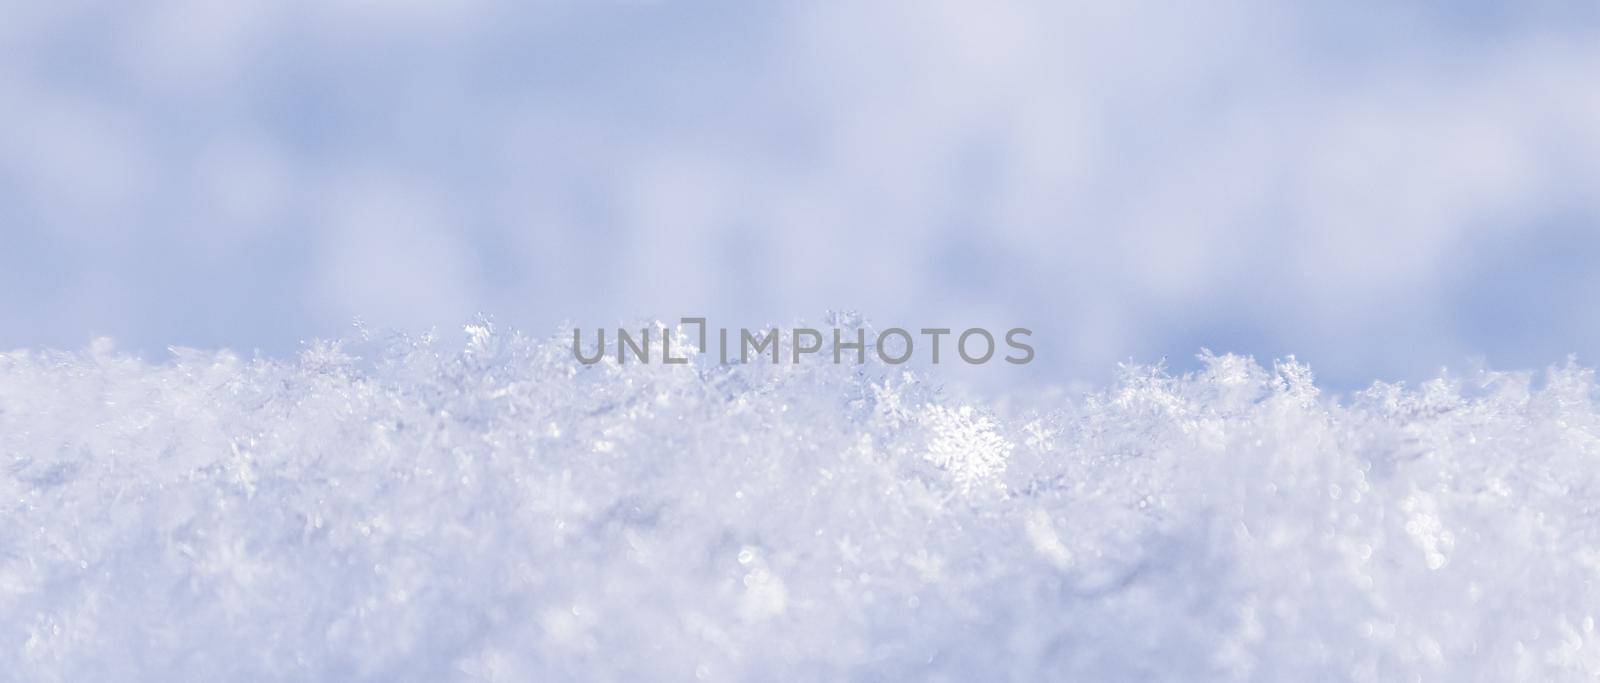 Background of fresh snow. Natural winter background. Snow texture in blue tone by Olayola